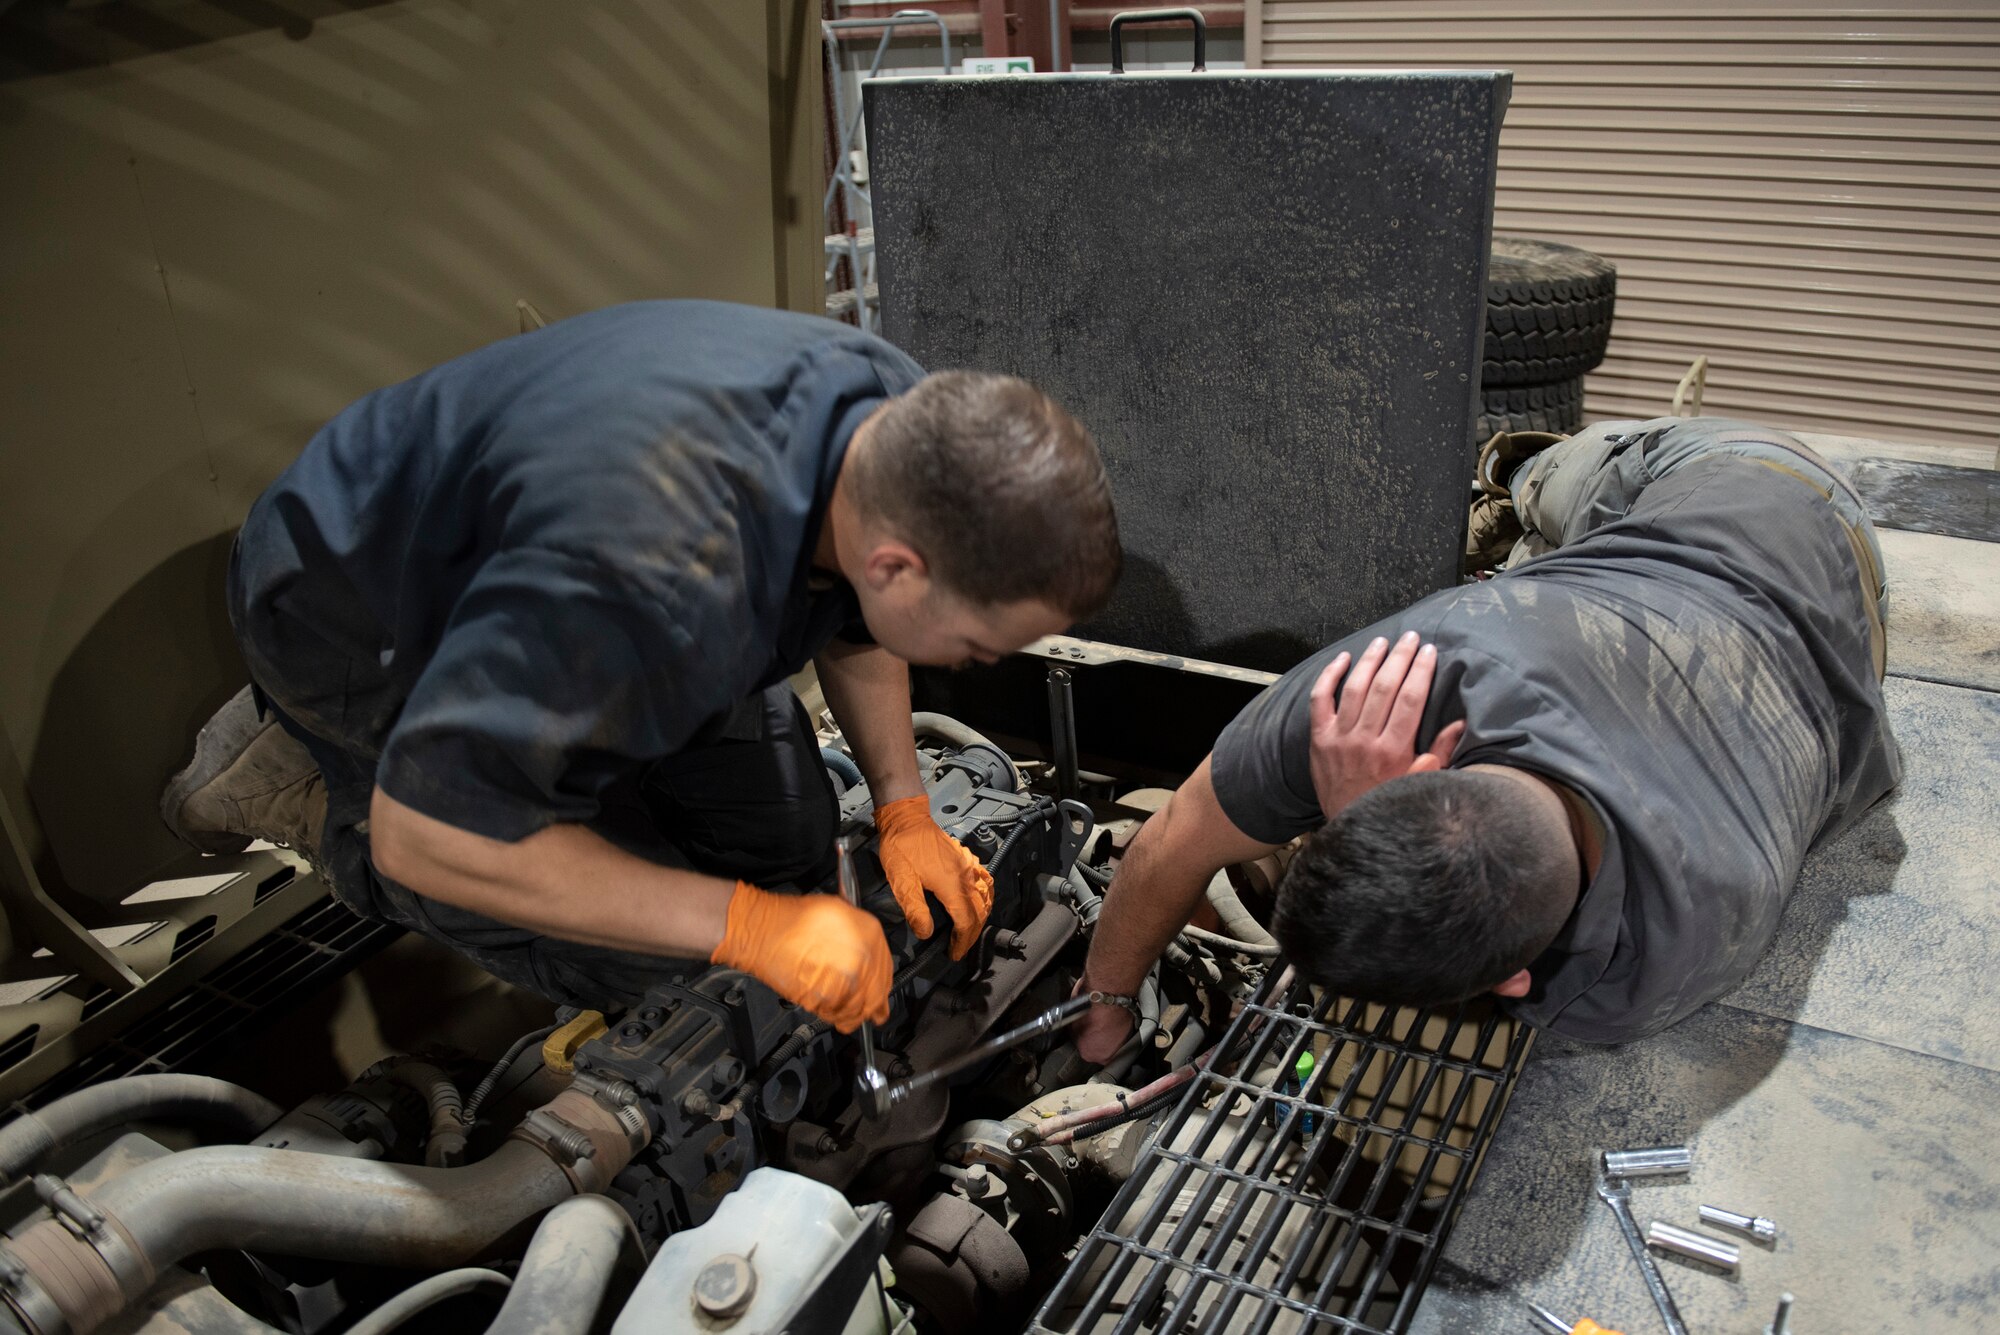 U.S. Air Force Staff Sgt. Douglas Johnson, (left) a vehicle maintainer assigned to the 386th Expeditionary Logistics Readiness Squadron, helps U.S. Air Force Staff Sgt. Brice Thompson, (right) a vehicle maintainer assigned to the 386th Expeditionary Logistics Readiness Squadron, change a starter in a MV-2 toe tractor at Ali Al Salem Air Base, Kuwait, July 8, 2021.